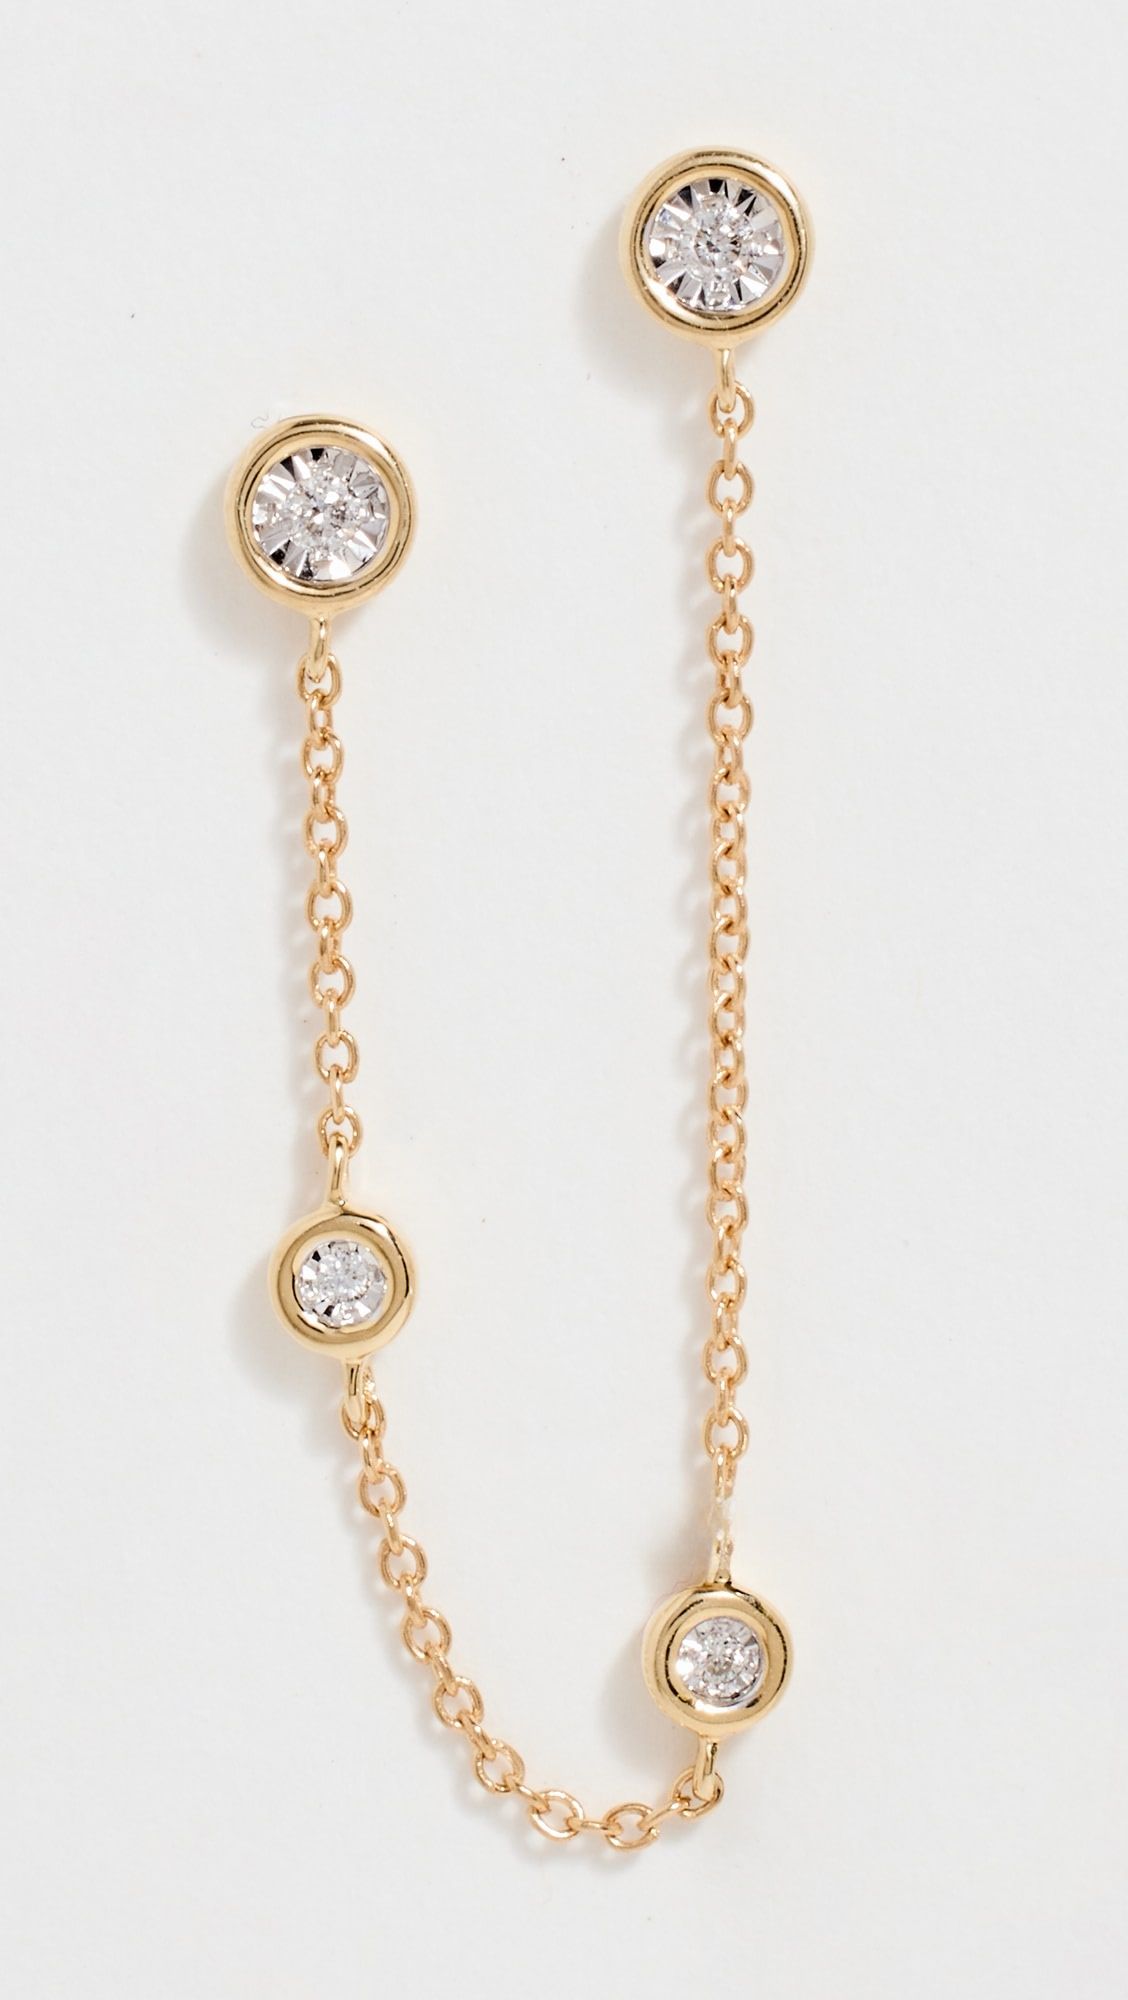 Stone and Strand | Shopbop